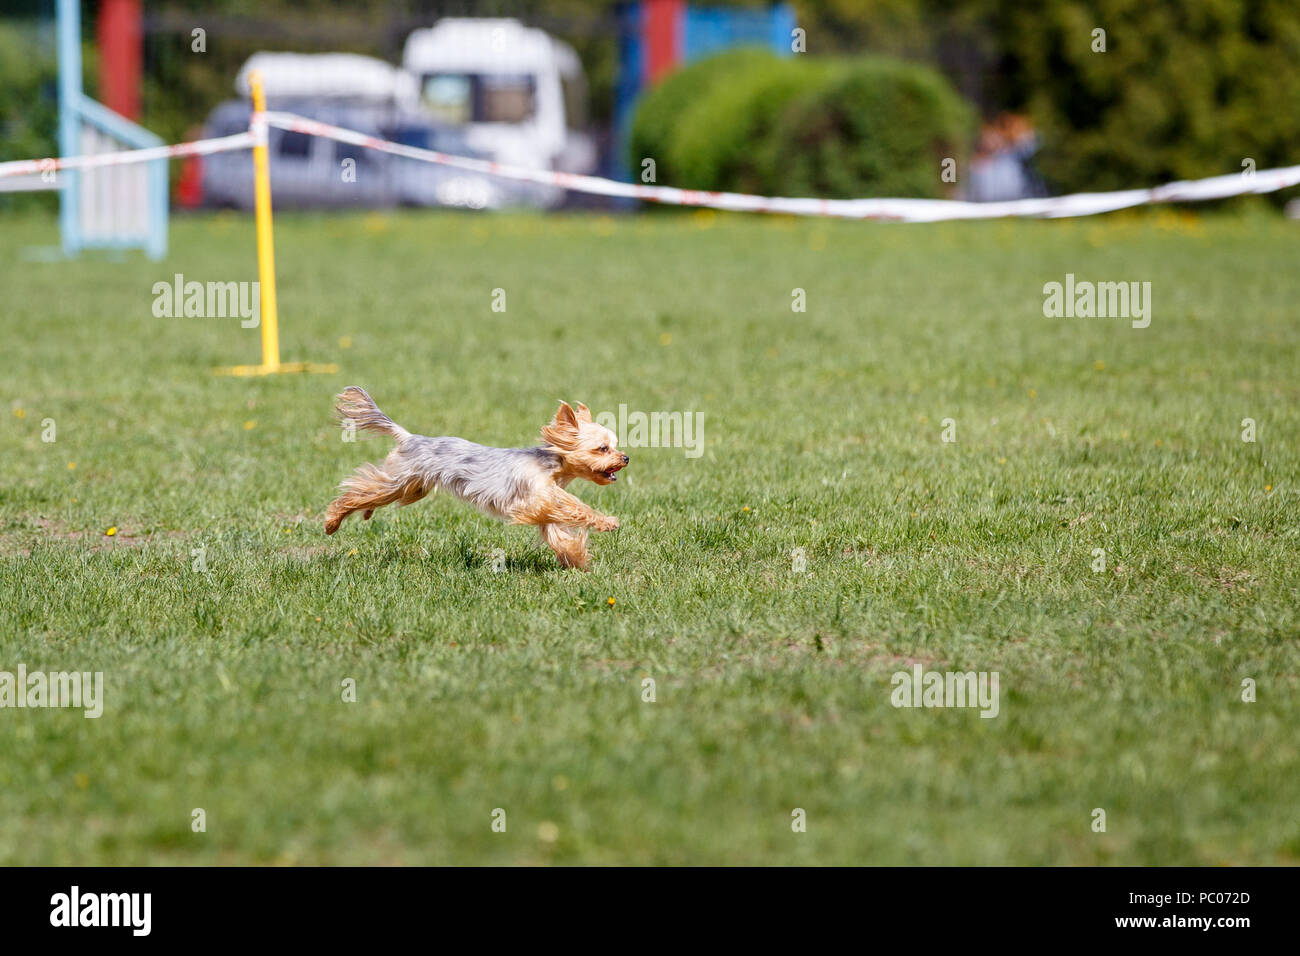 Running dog on its course in agility competition Stock Photo